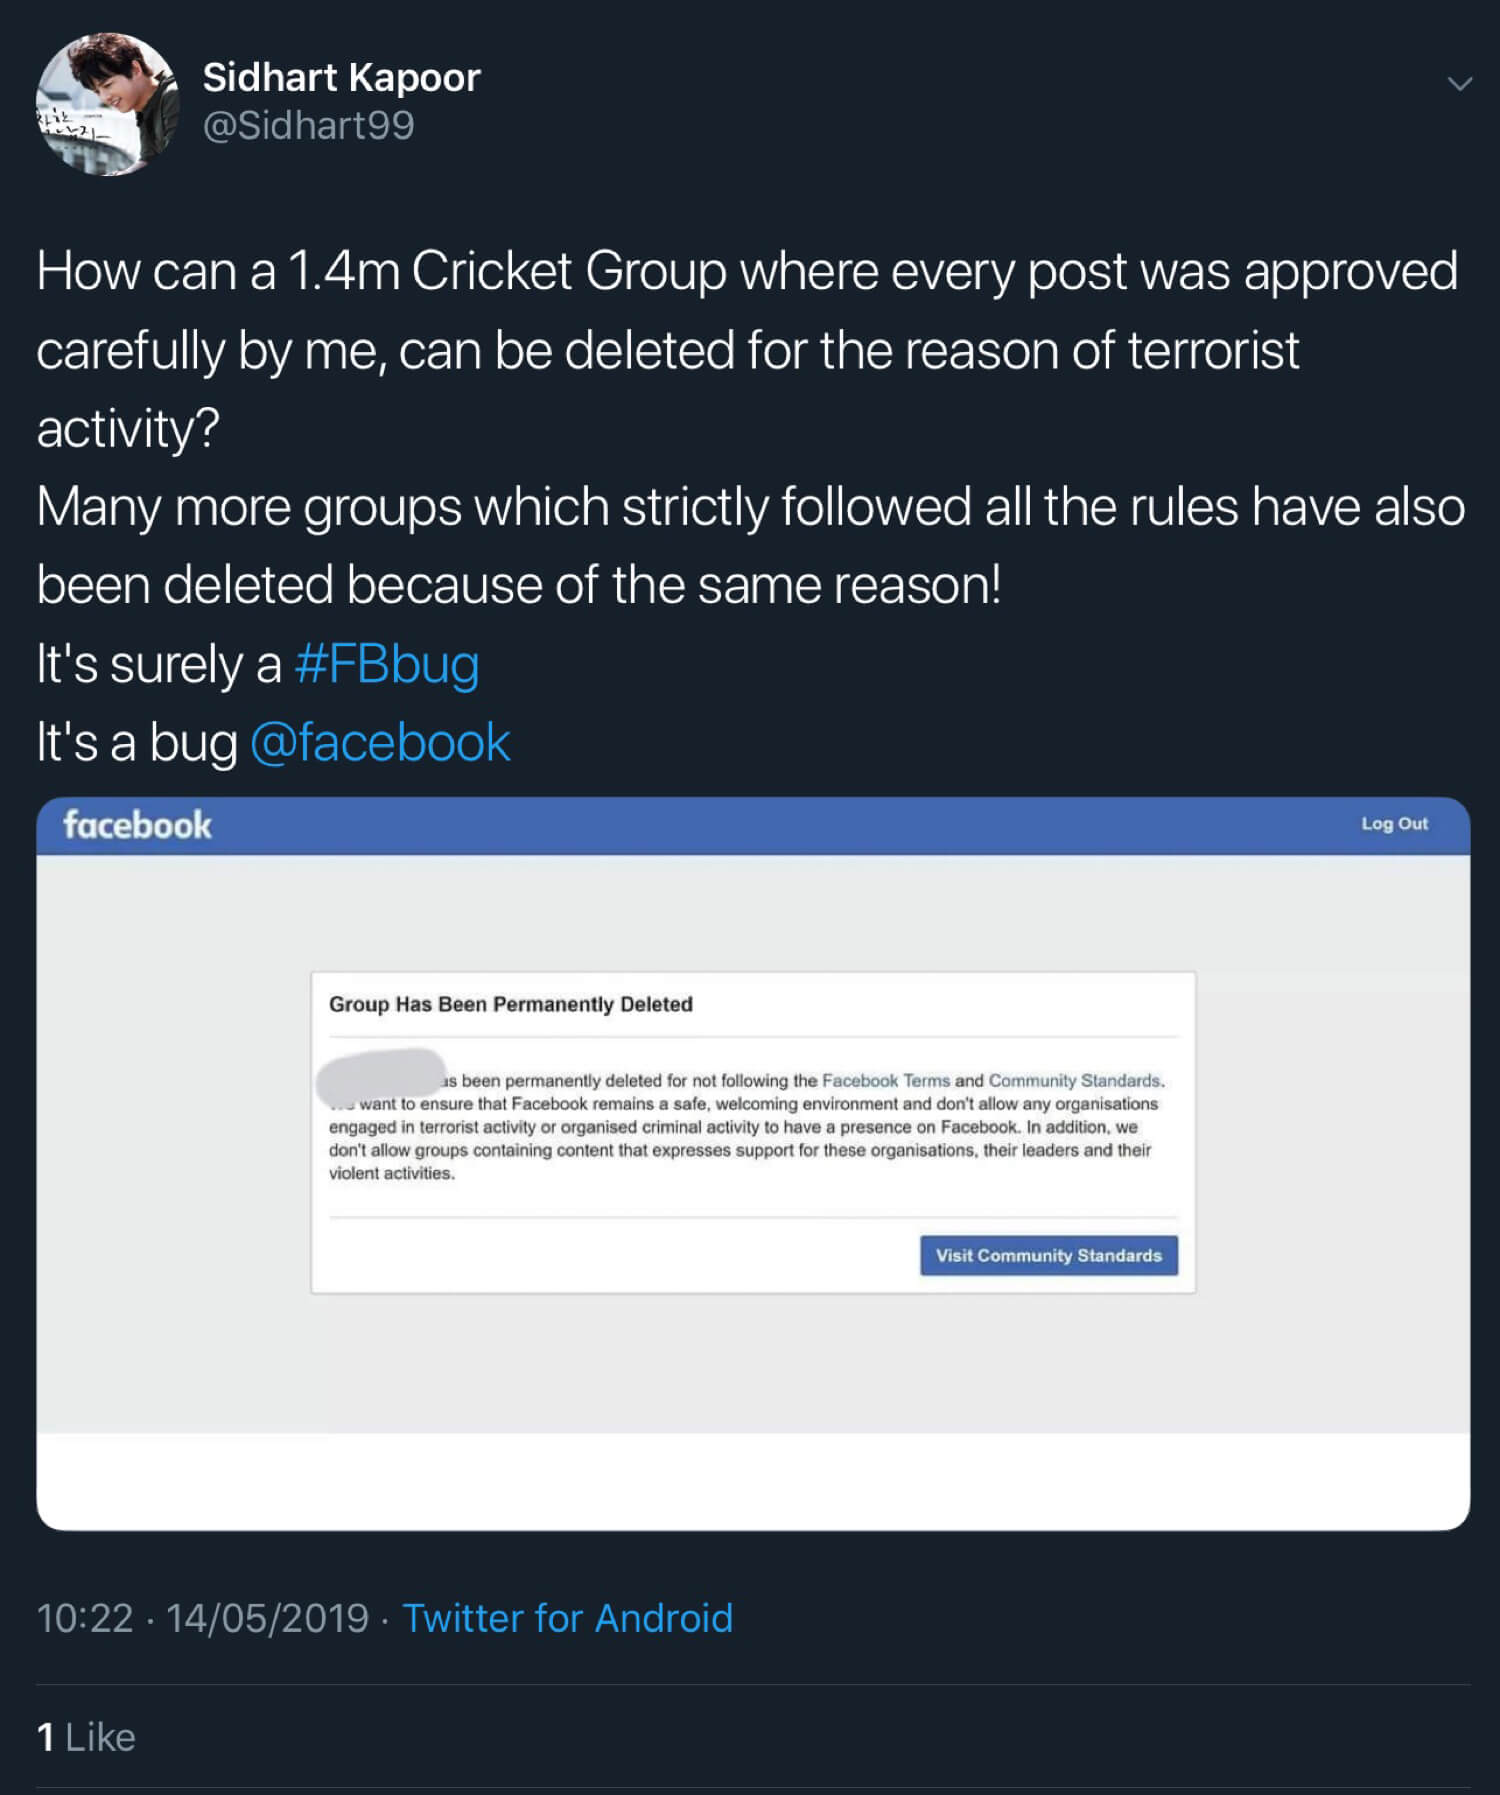 Sidhart Kapoor announcing that Facebook has deleted a cricket group with over 1.4 million members.